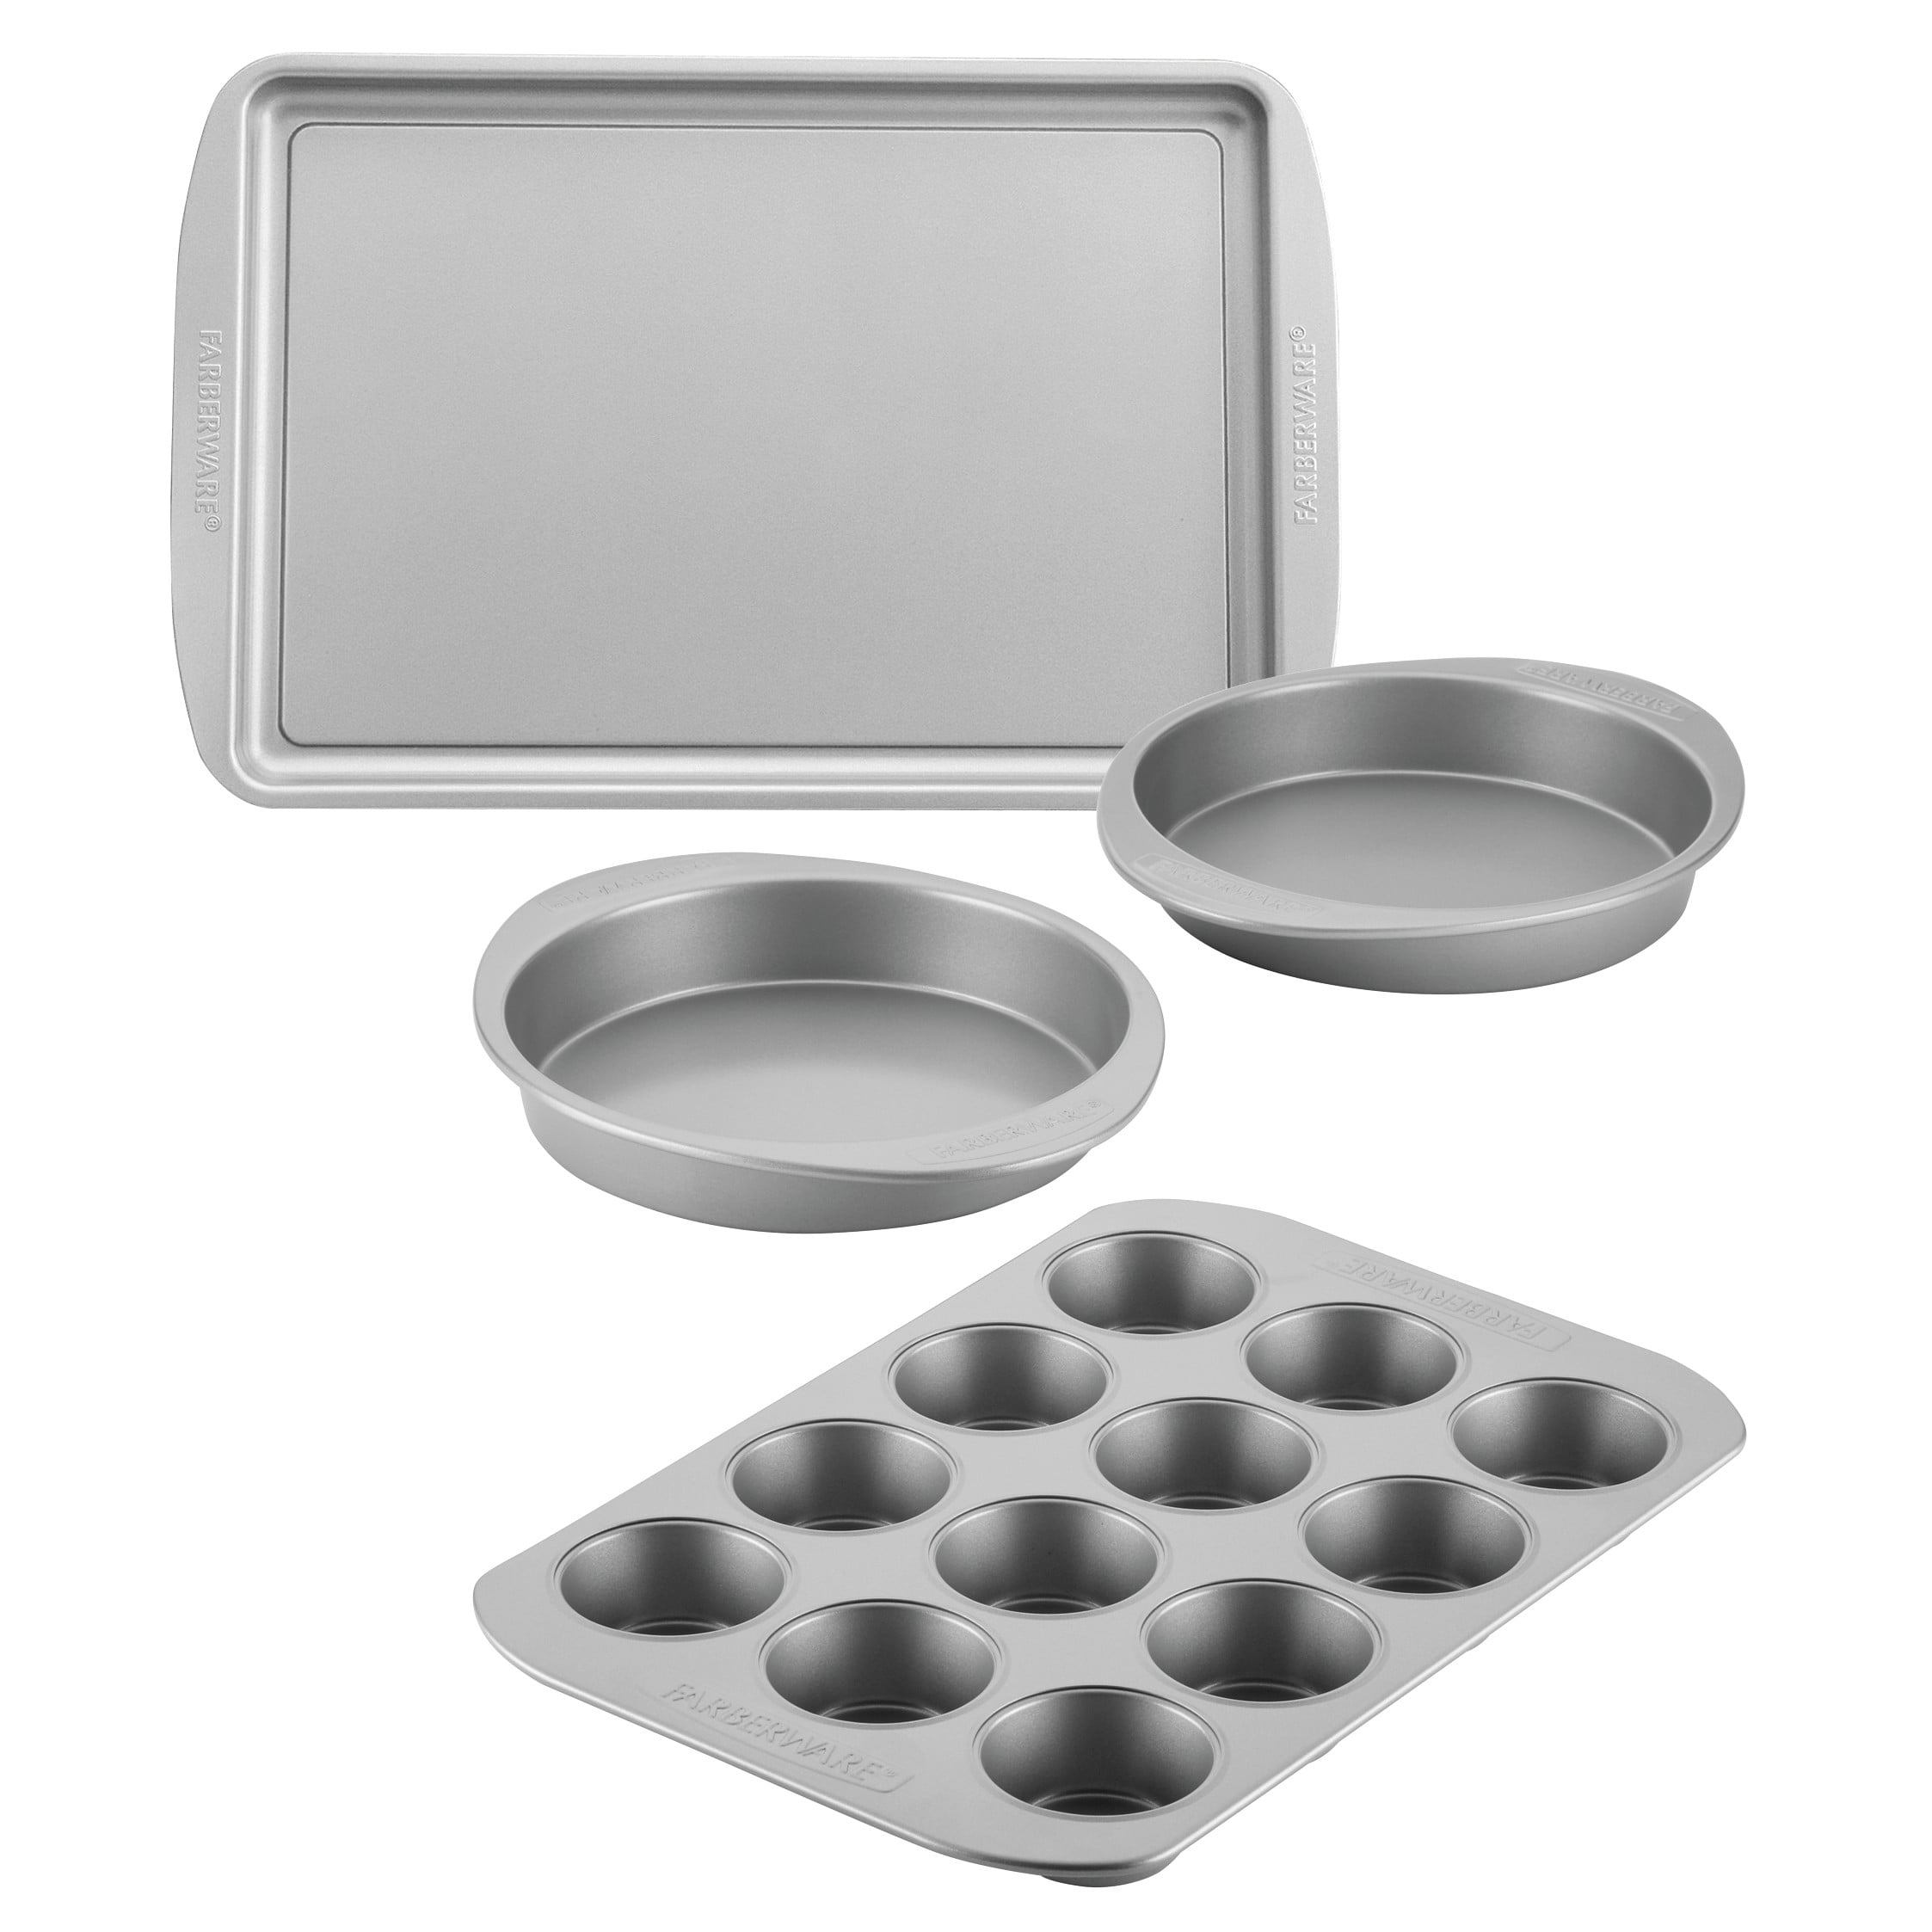 Calphalon Nonstick Bakeware Set, 10-Piece, Silver & Baking Sheets, Nonstick  Baking Pans Set for Cookies and Cakes, 12 x 17 in, Set of 2, Silver